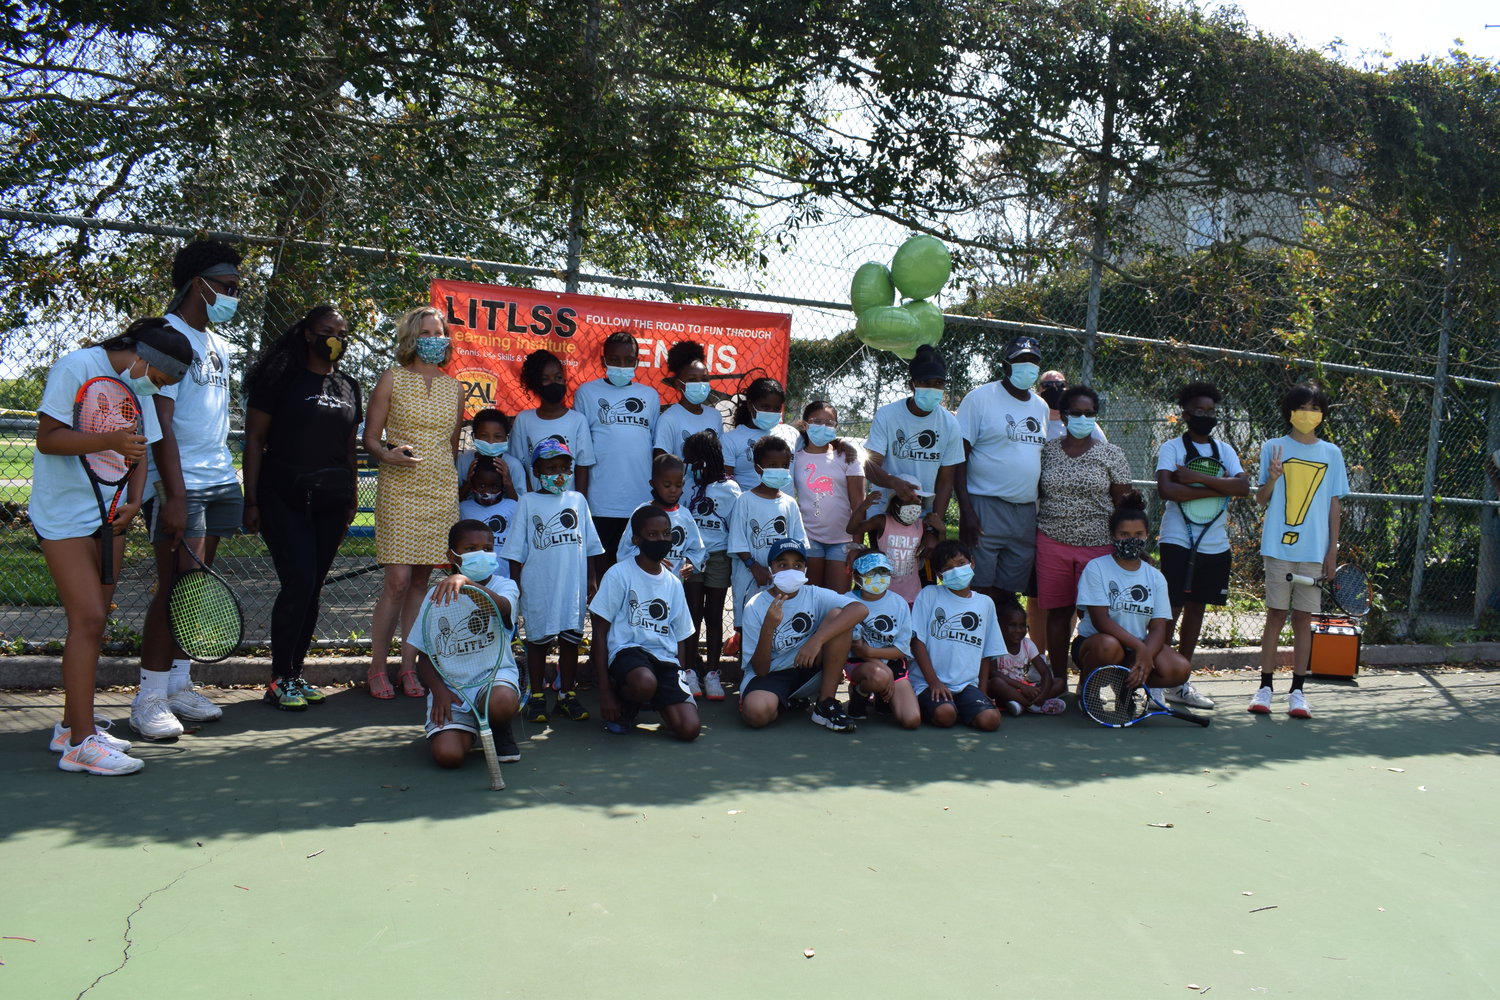 About 20 young people took part in the annual LITLSS tennis summer program with Burgess from July through August.